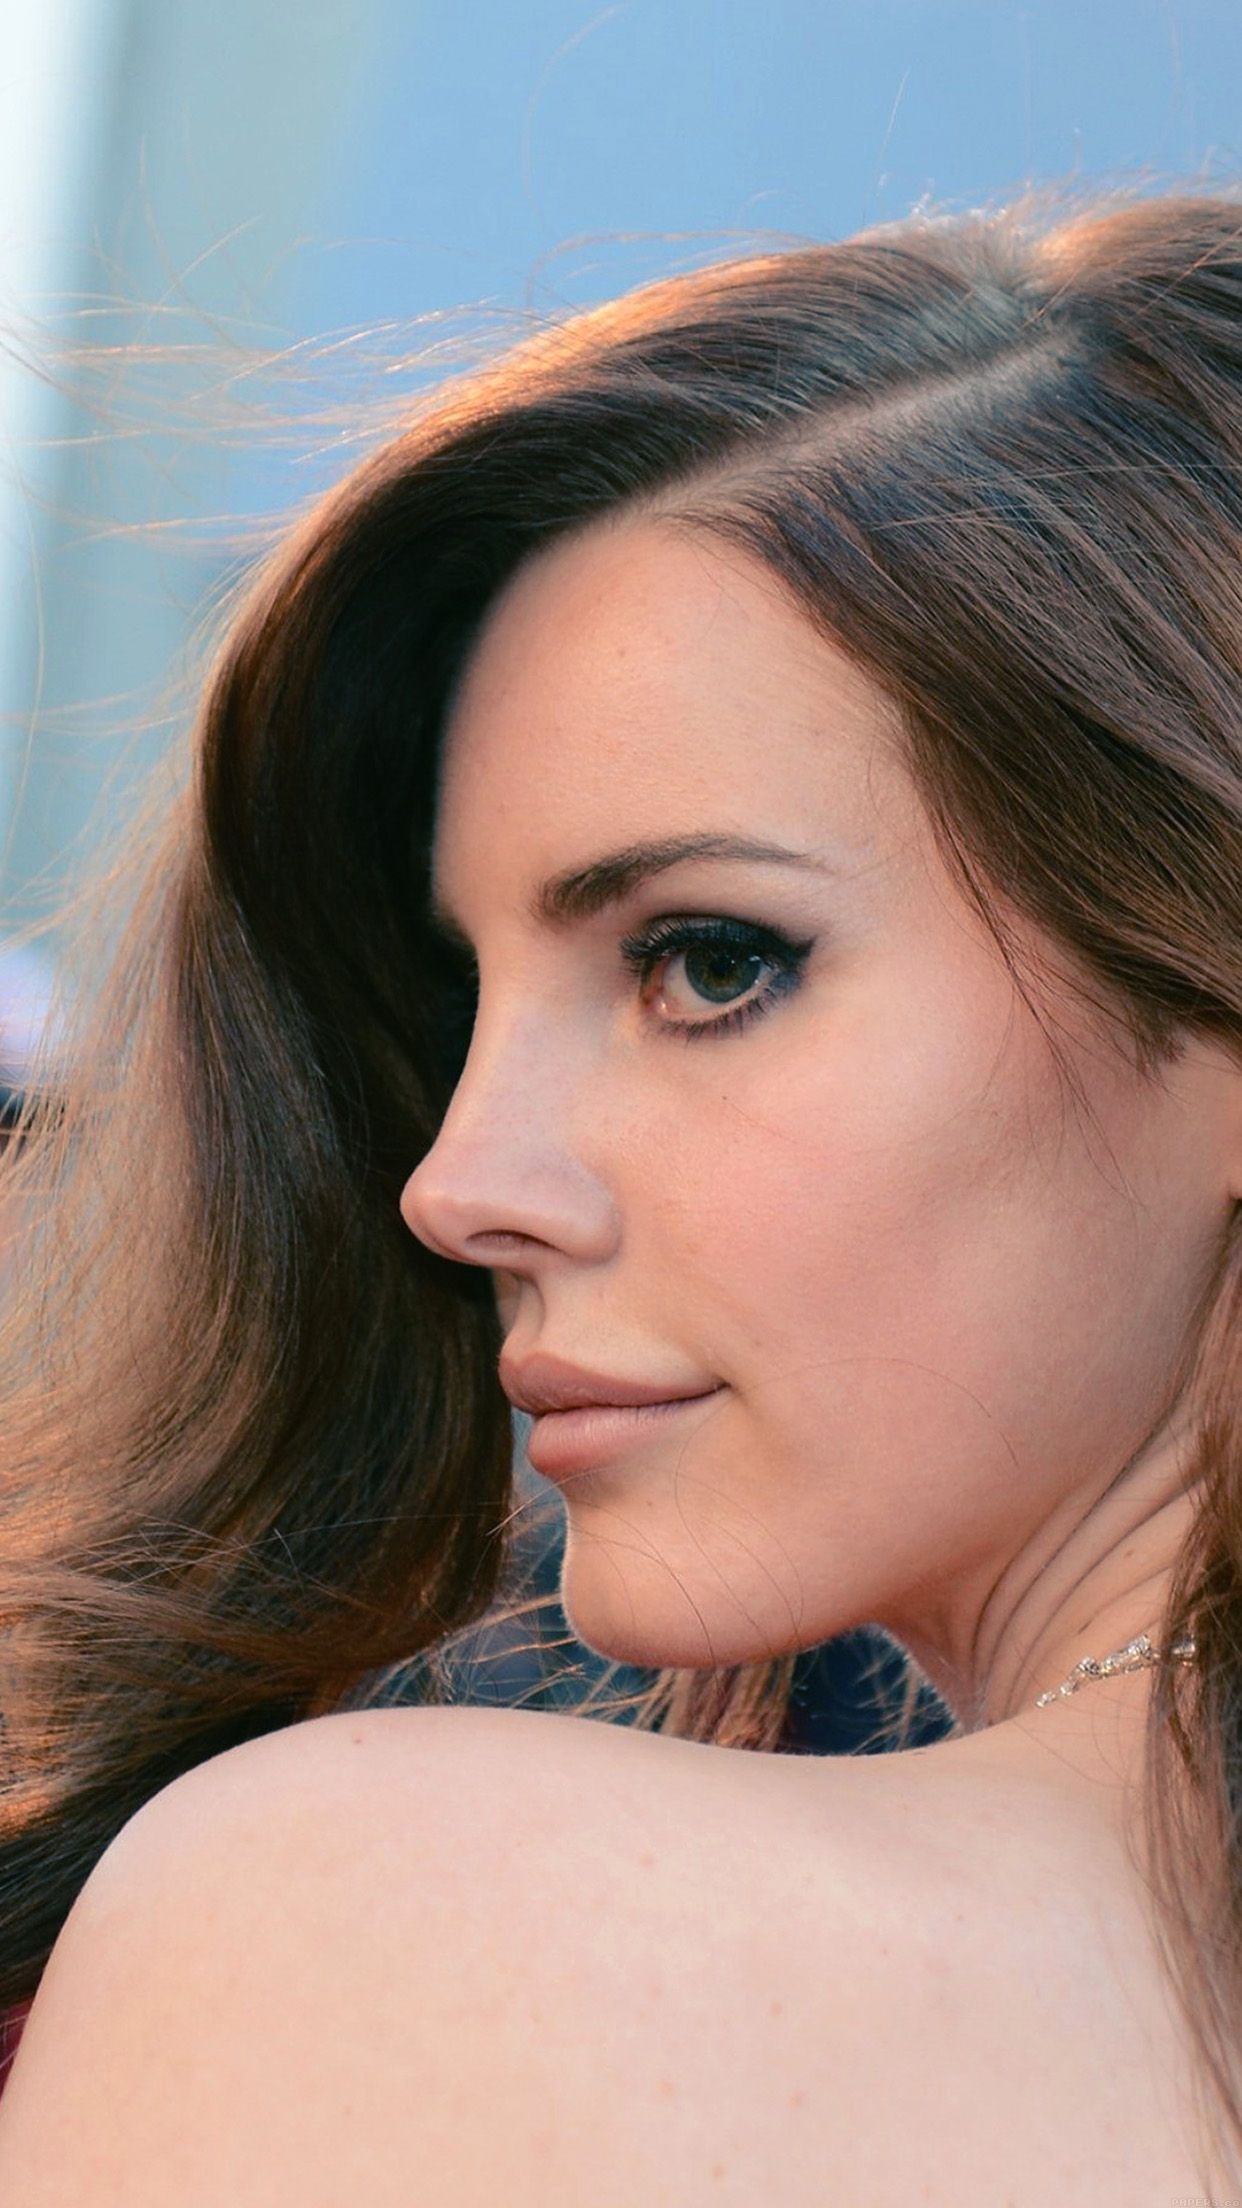 A woman with long hair and wearing makeup - Lana Del Rey